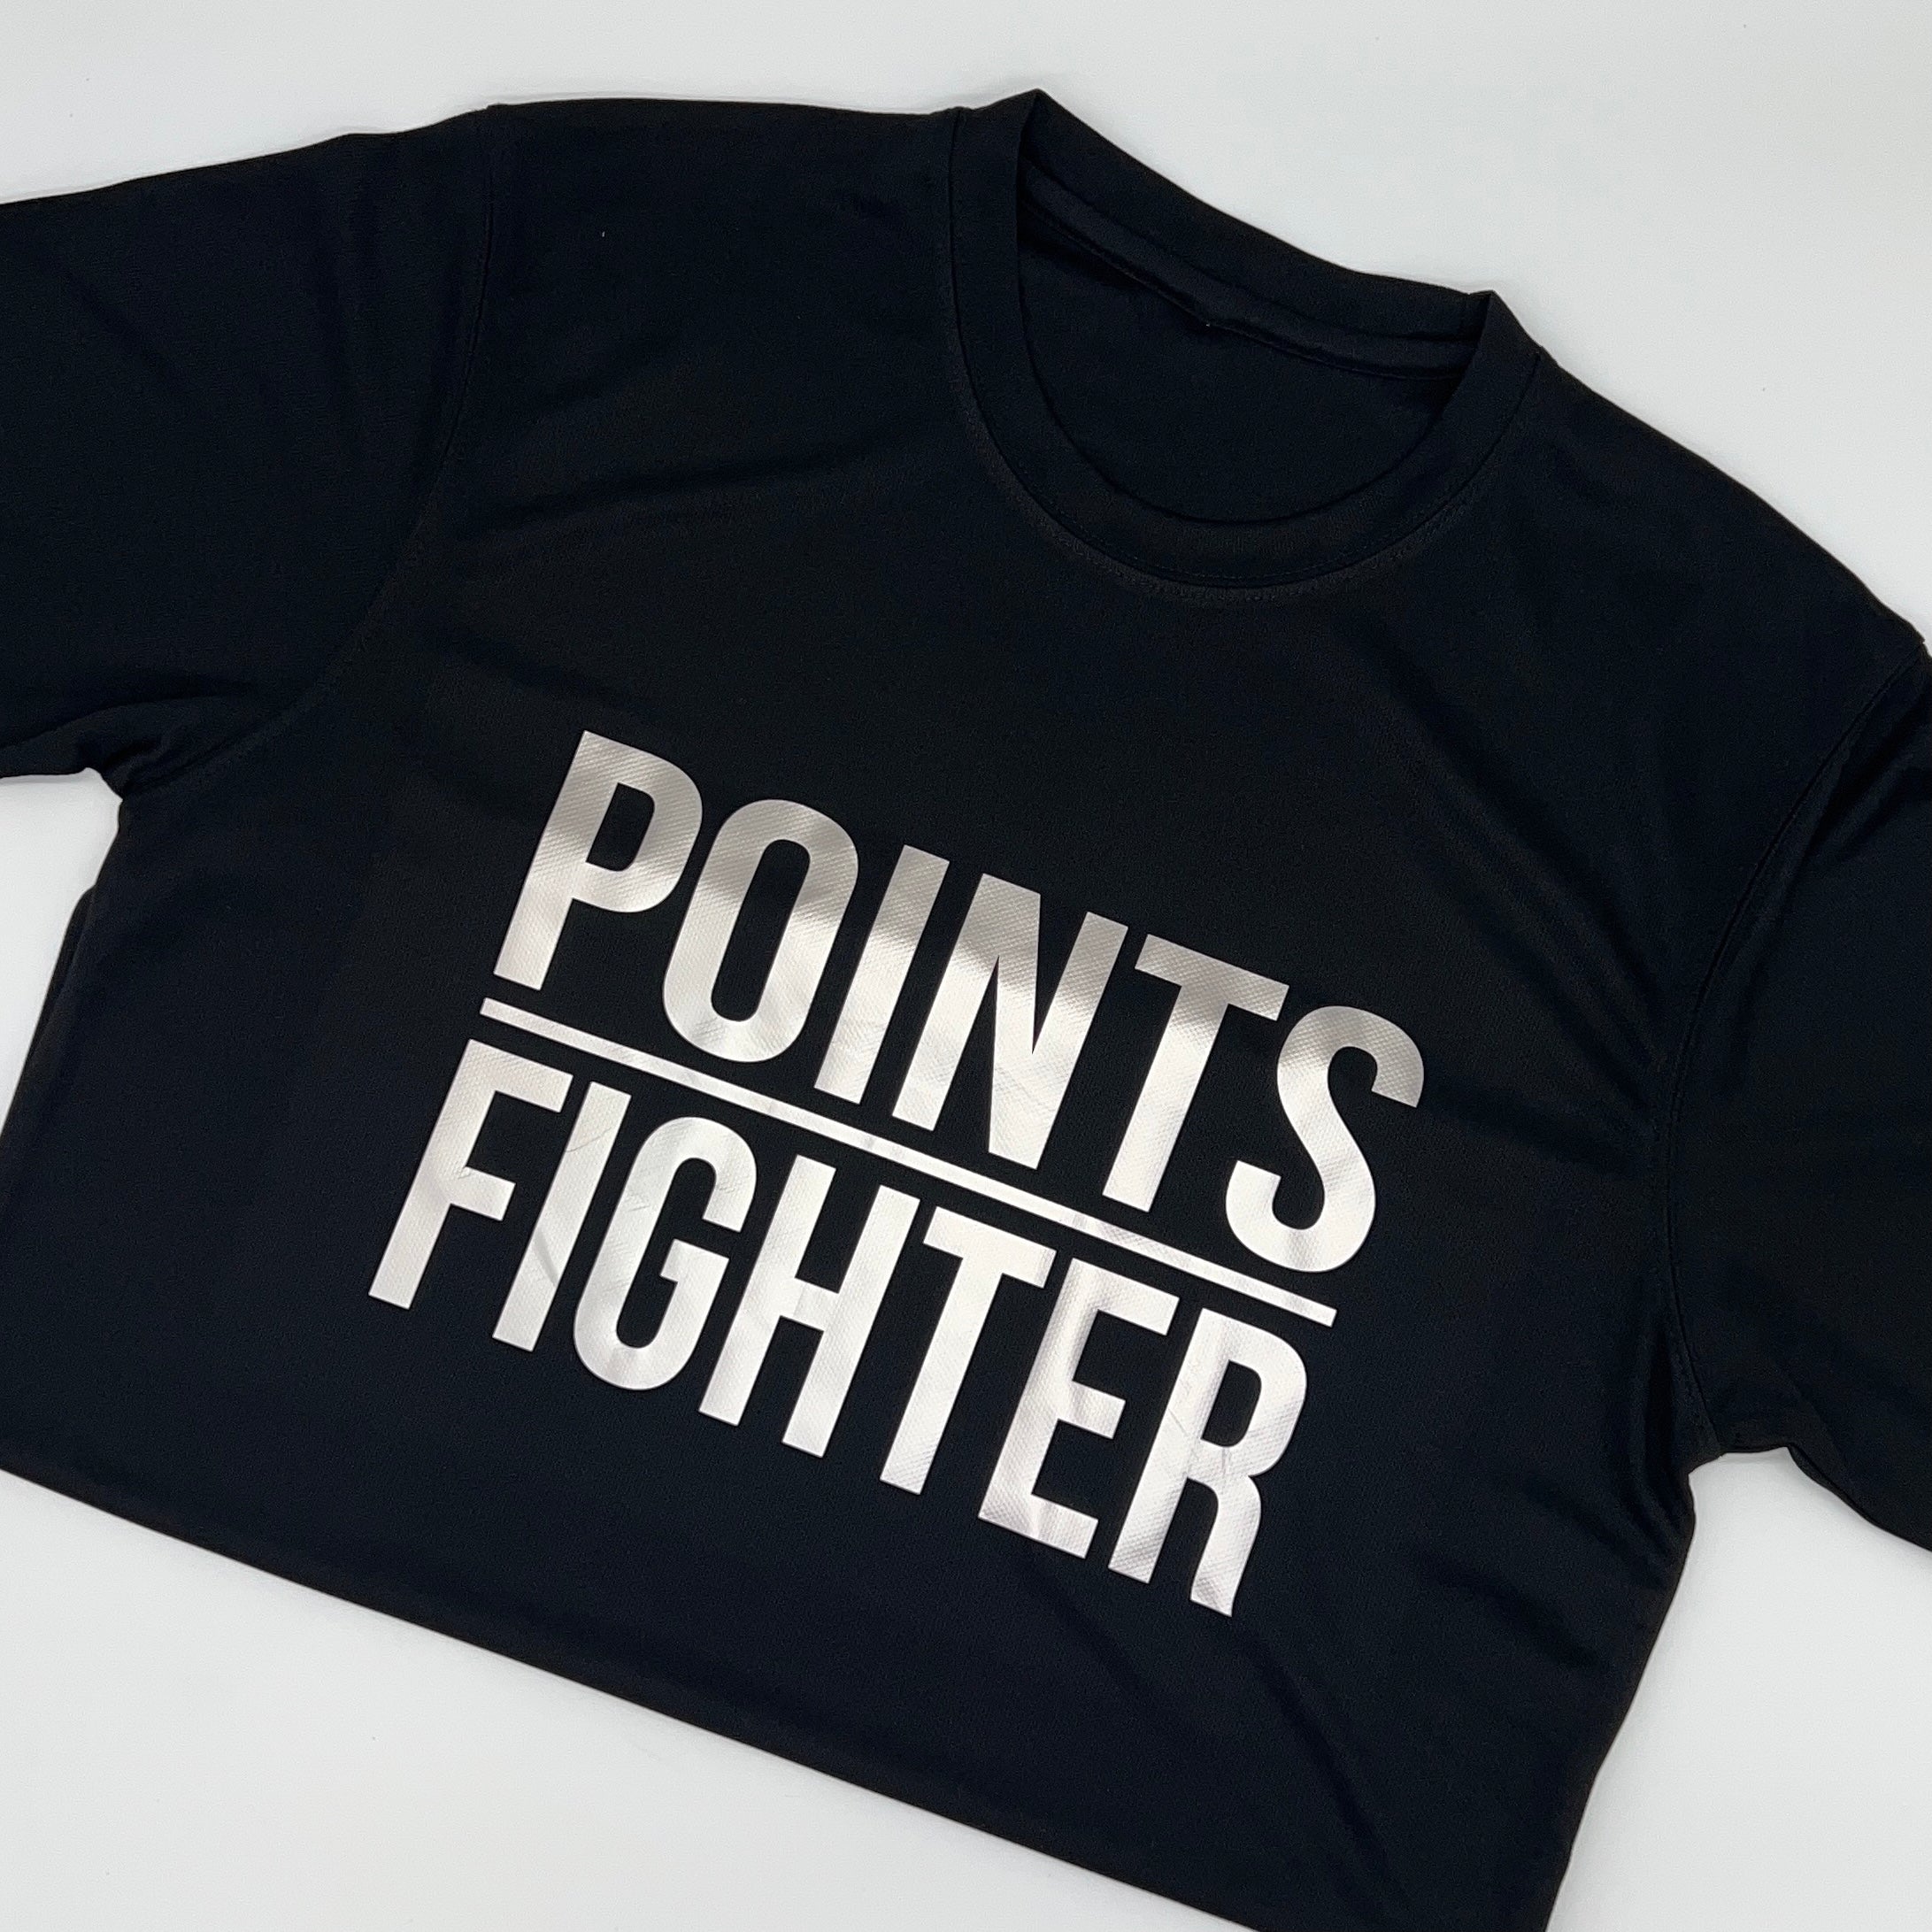 Points Fighter Tech T-Shirt - Silver